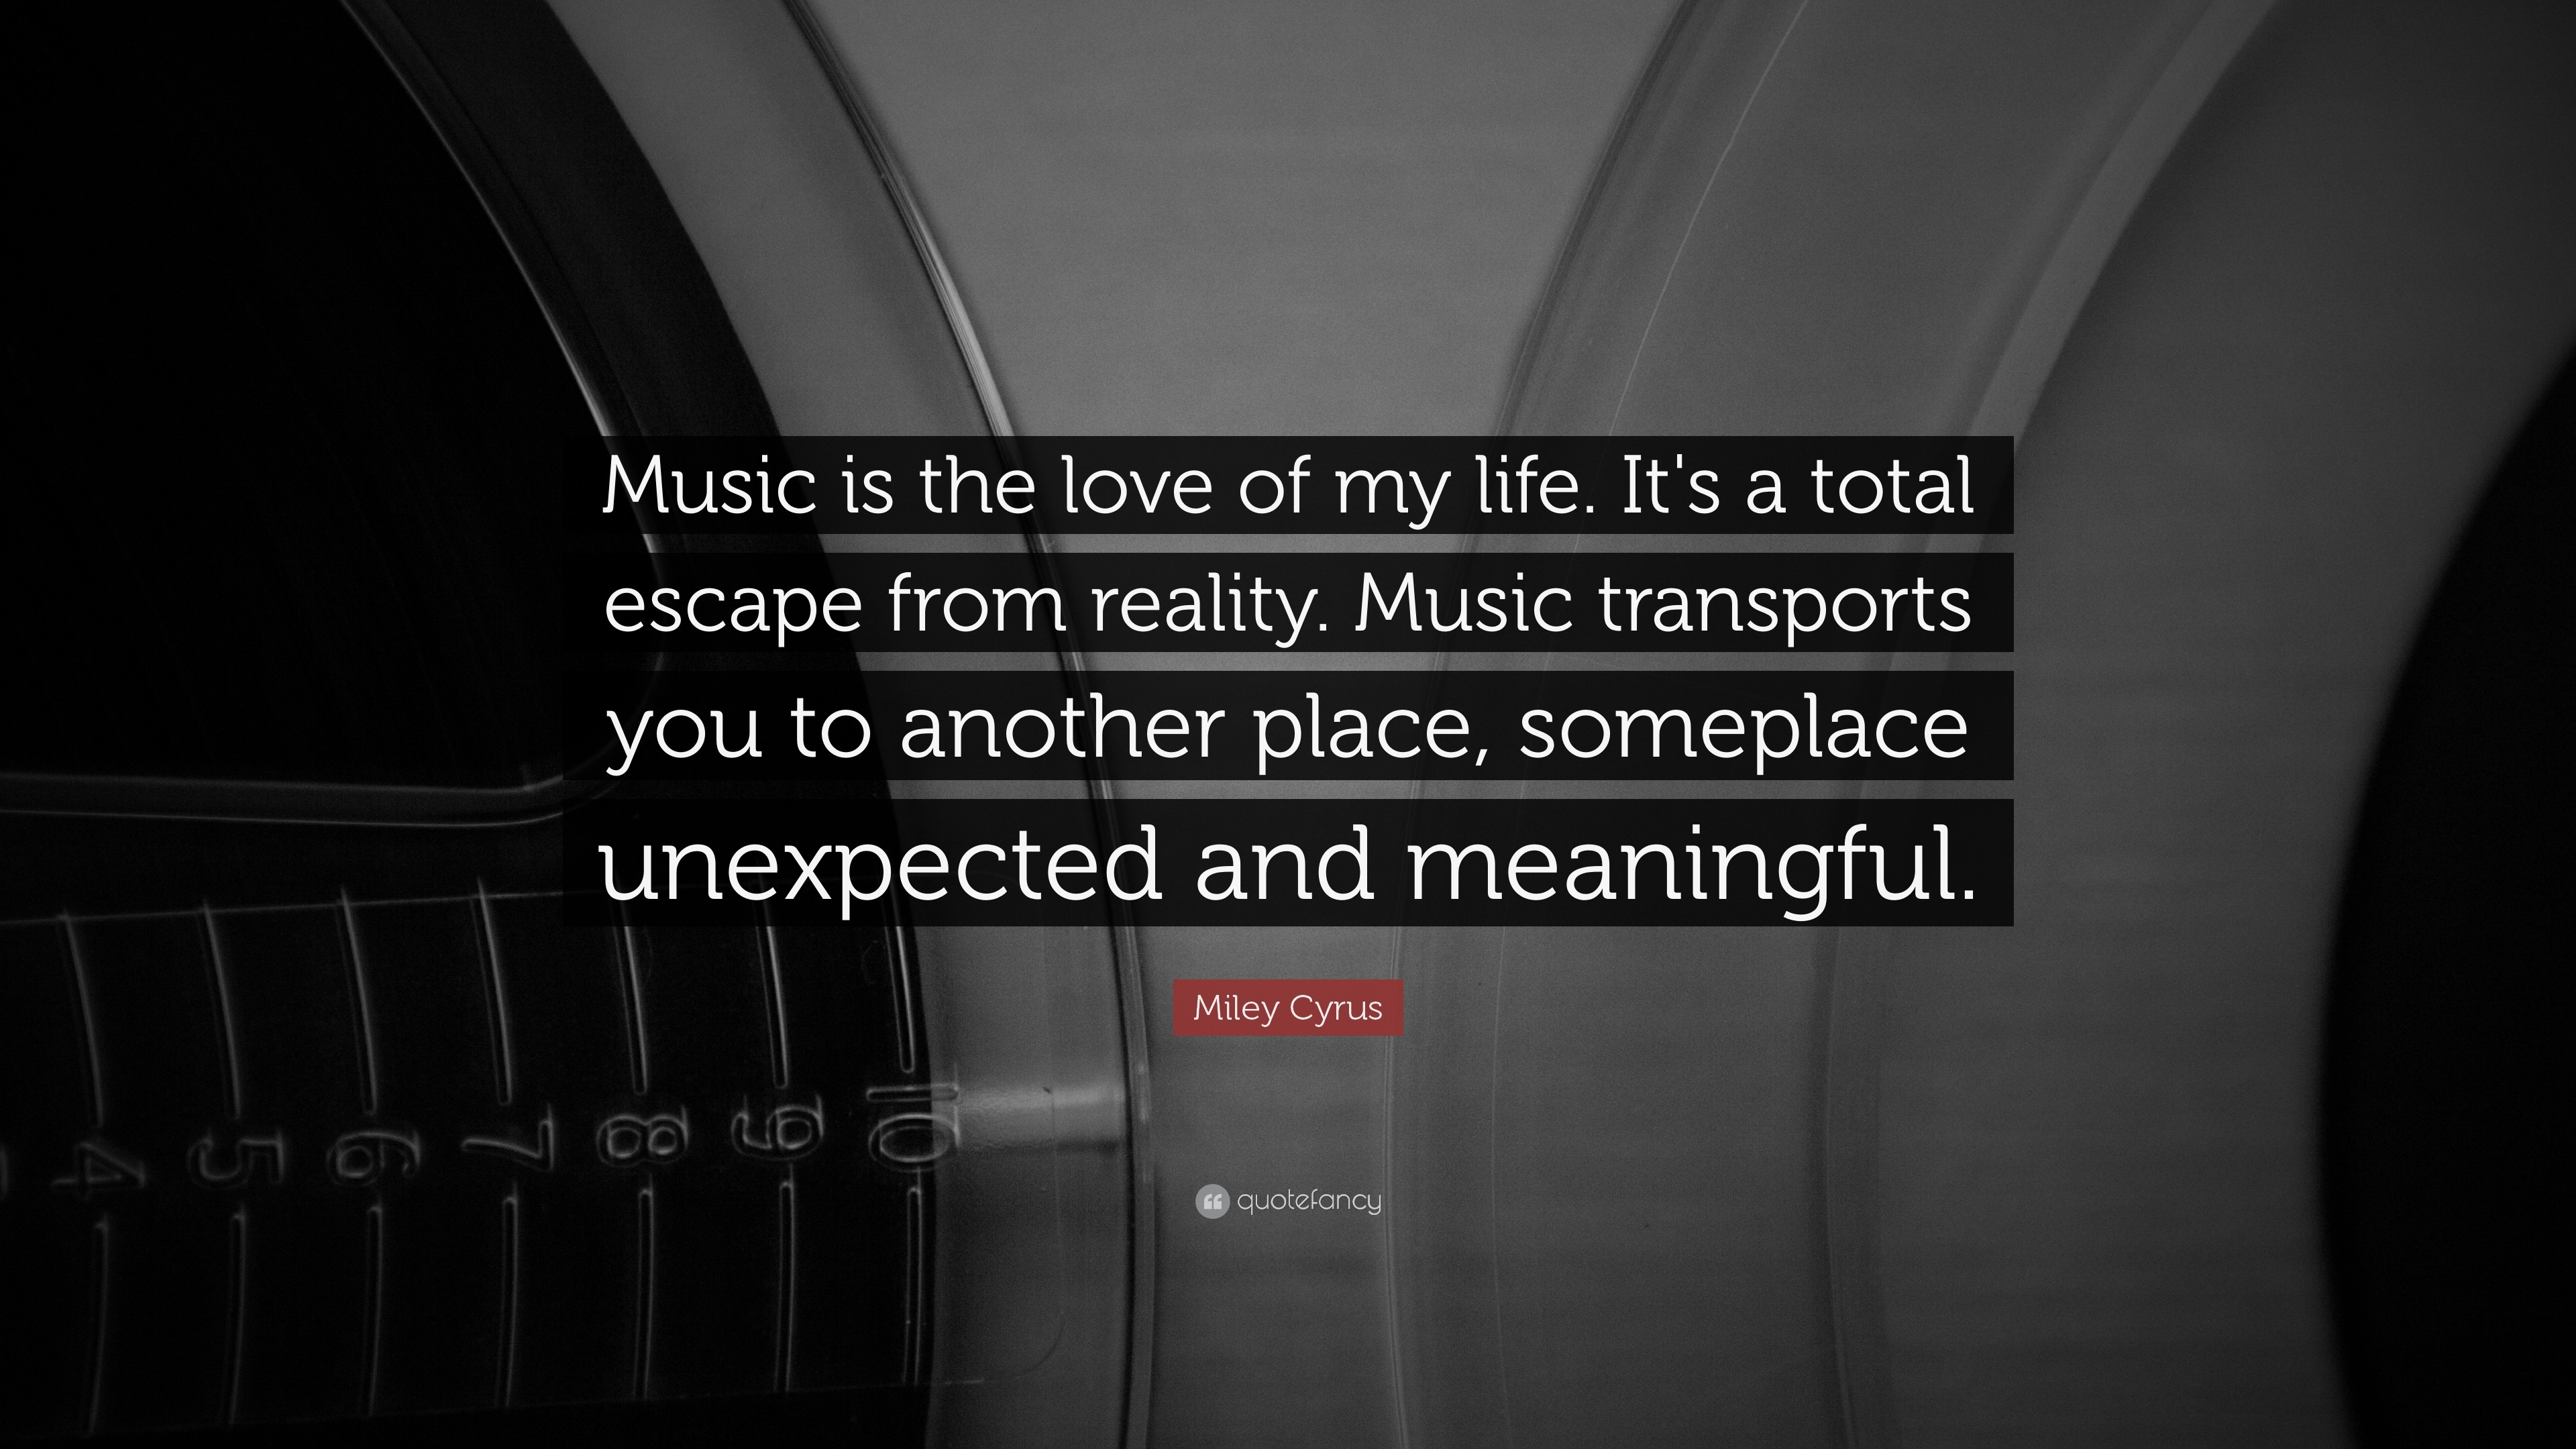 3840x2160 Miley Cyrus Quote: “Music is the love of my life. It's a total